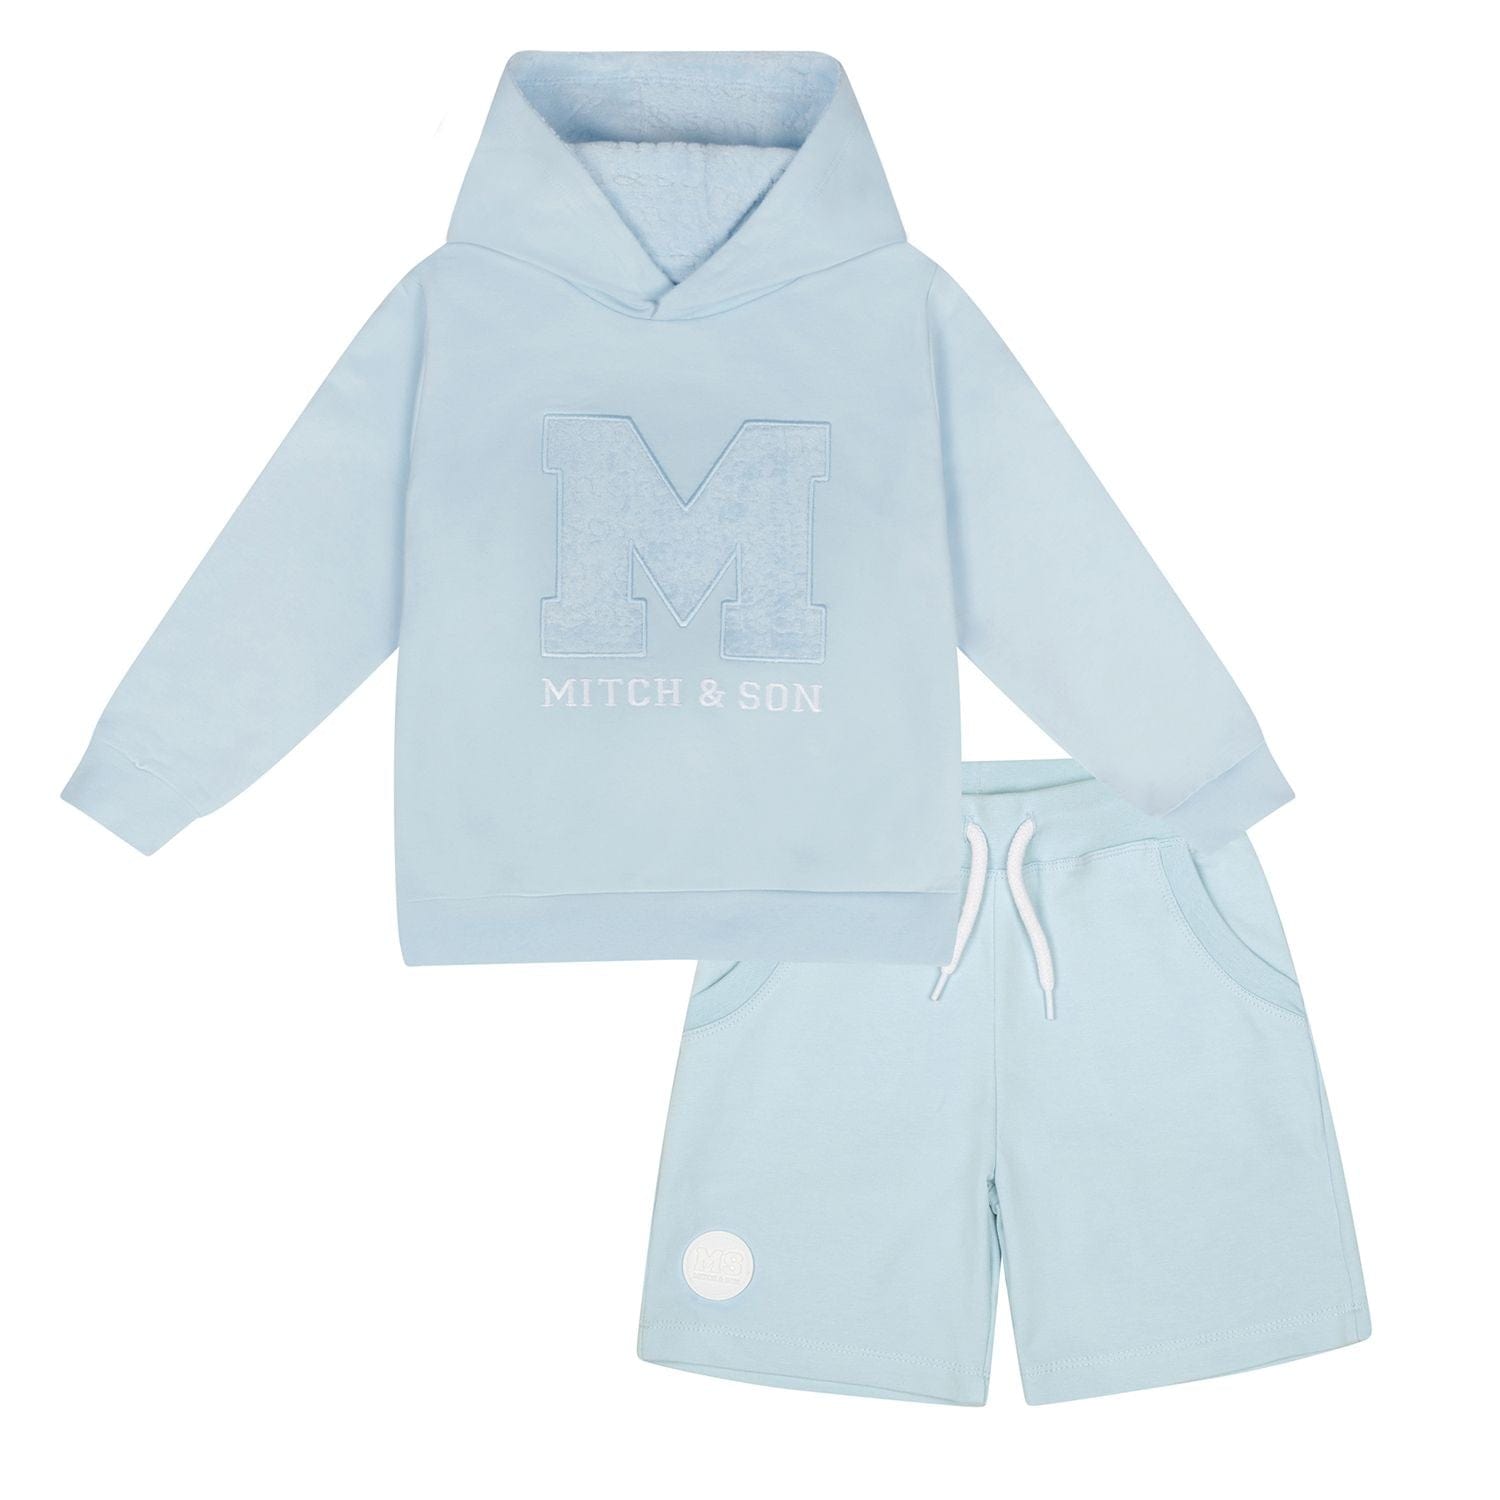 Mitch & Son Hooded Shorts Set - Tommy